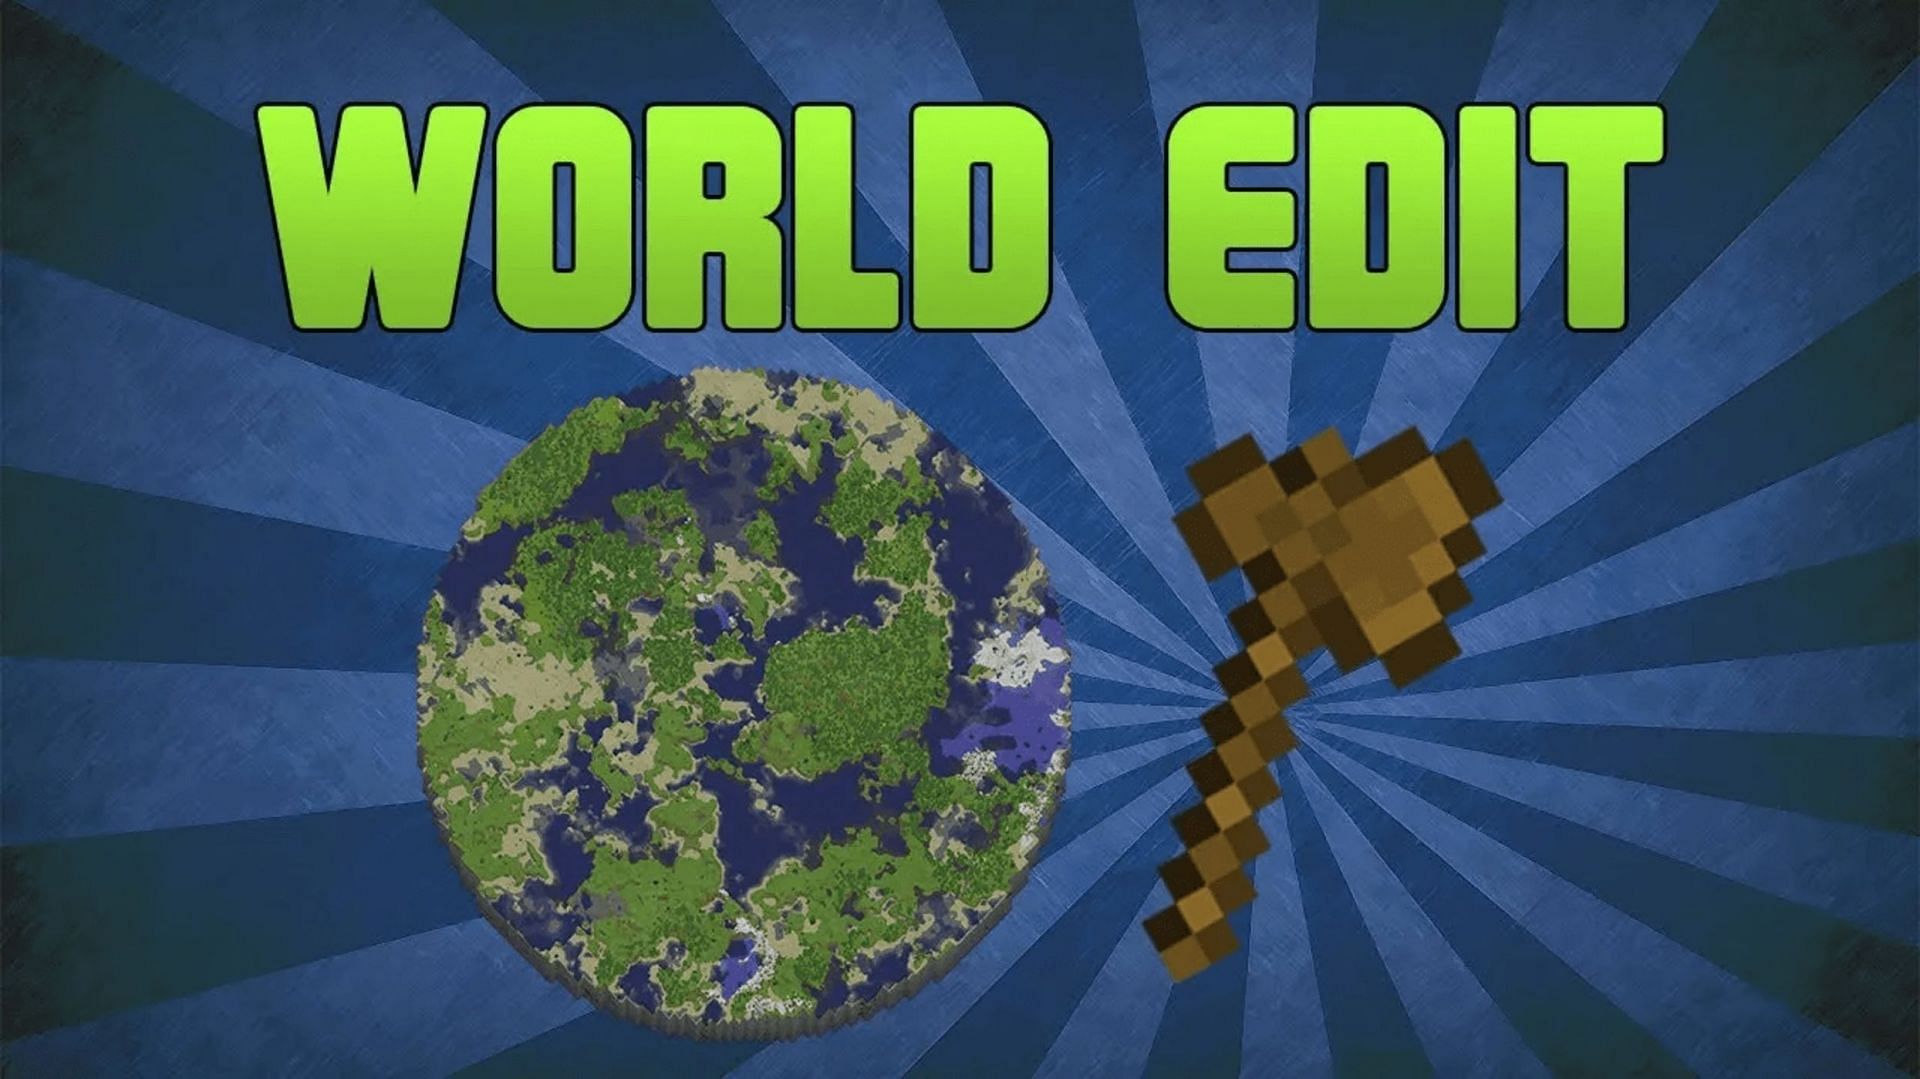 WorldEdit allows admins to create the worlds of their dreams (Image via MinecraftSix)